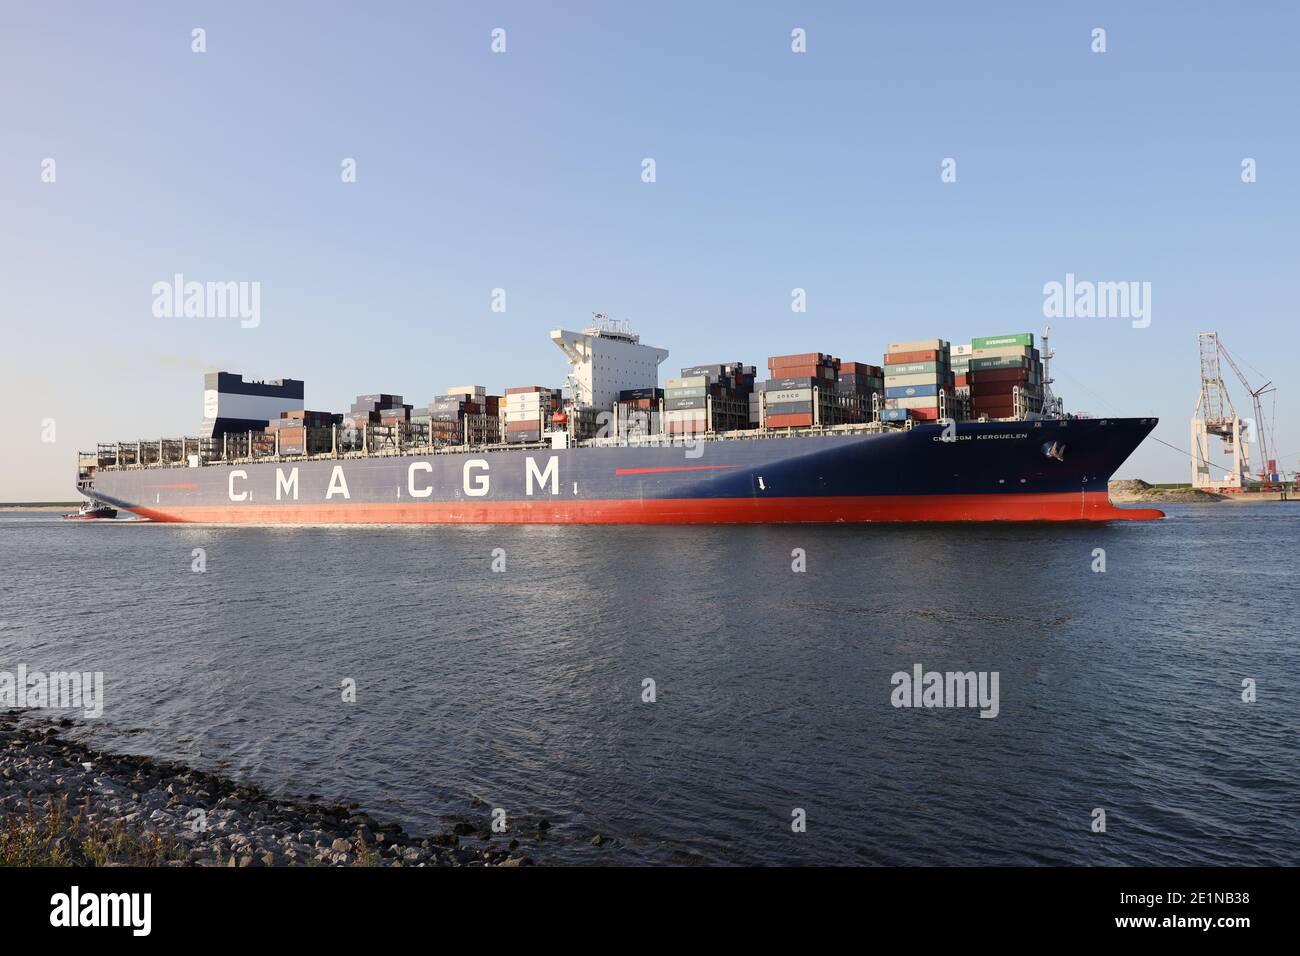 The container ship CMA CGM Kerguelen will leave Maasvlakte 2 in Rotterdam on September 18, 2020. Stock Photo